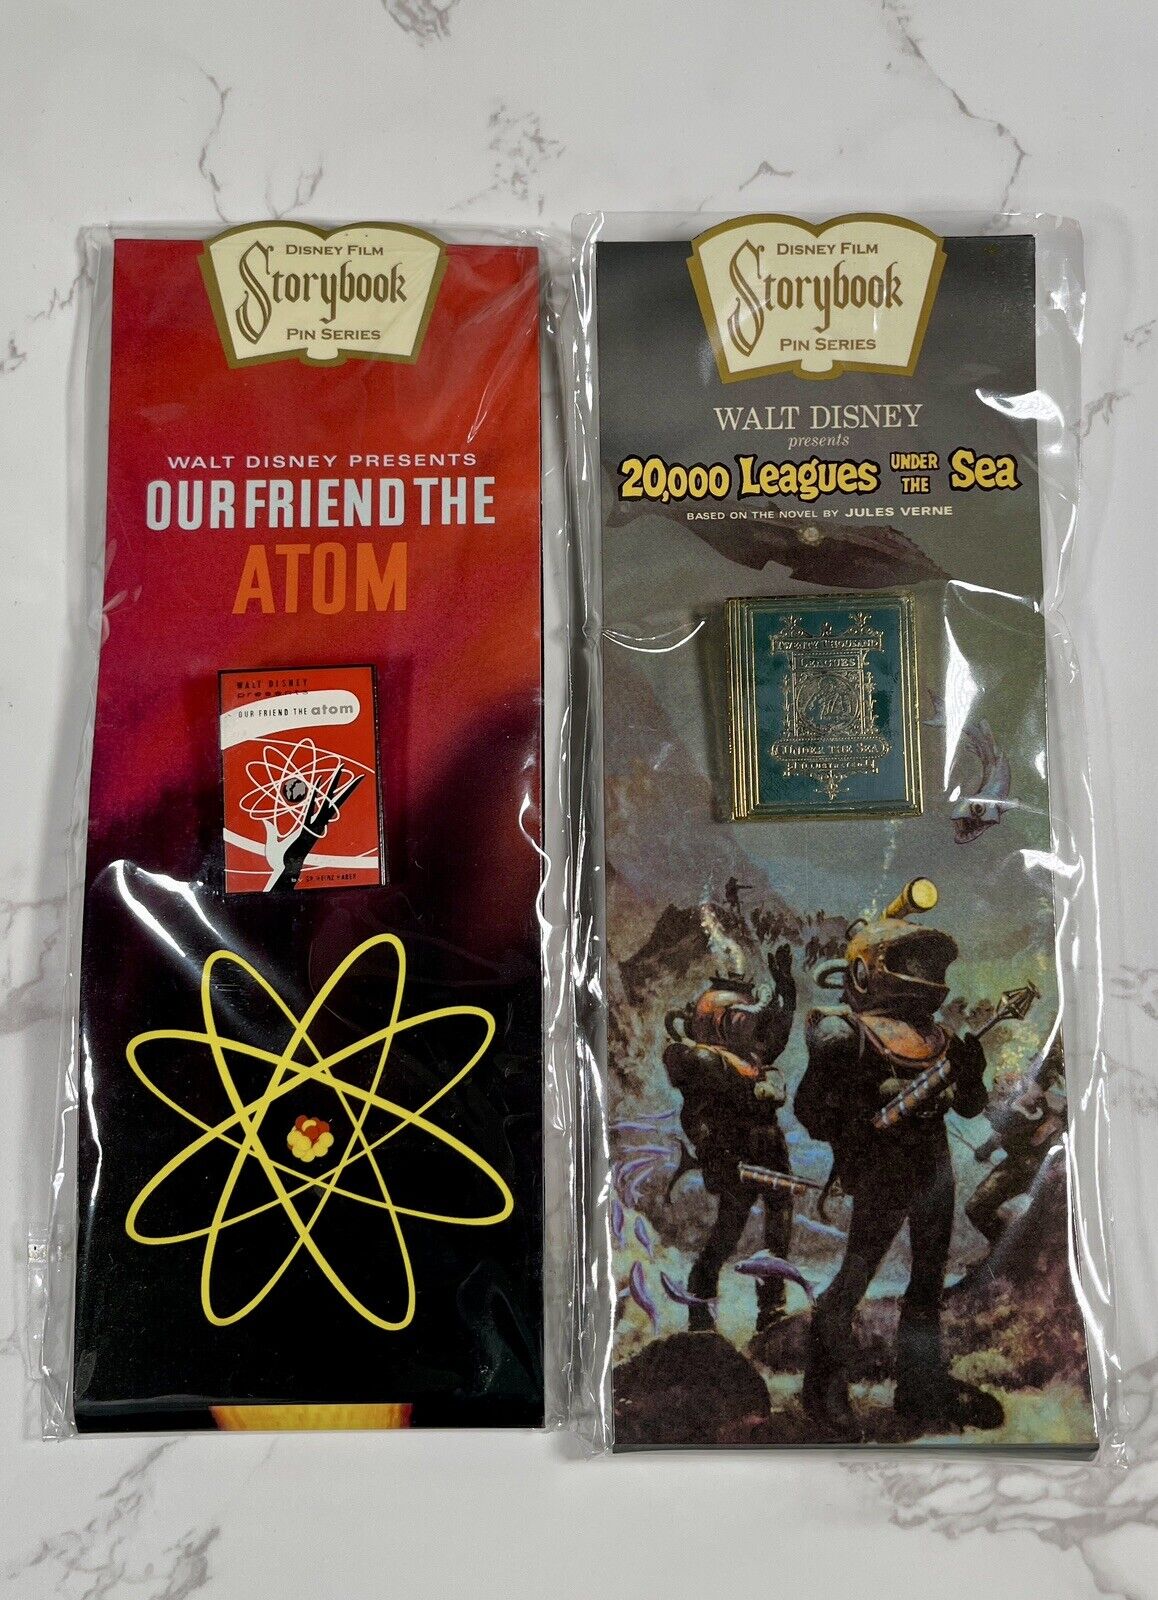 Disney Storybook Pin Series Our Friend the Atom & 20,000 Leagues Under The Sea